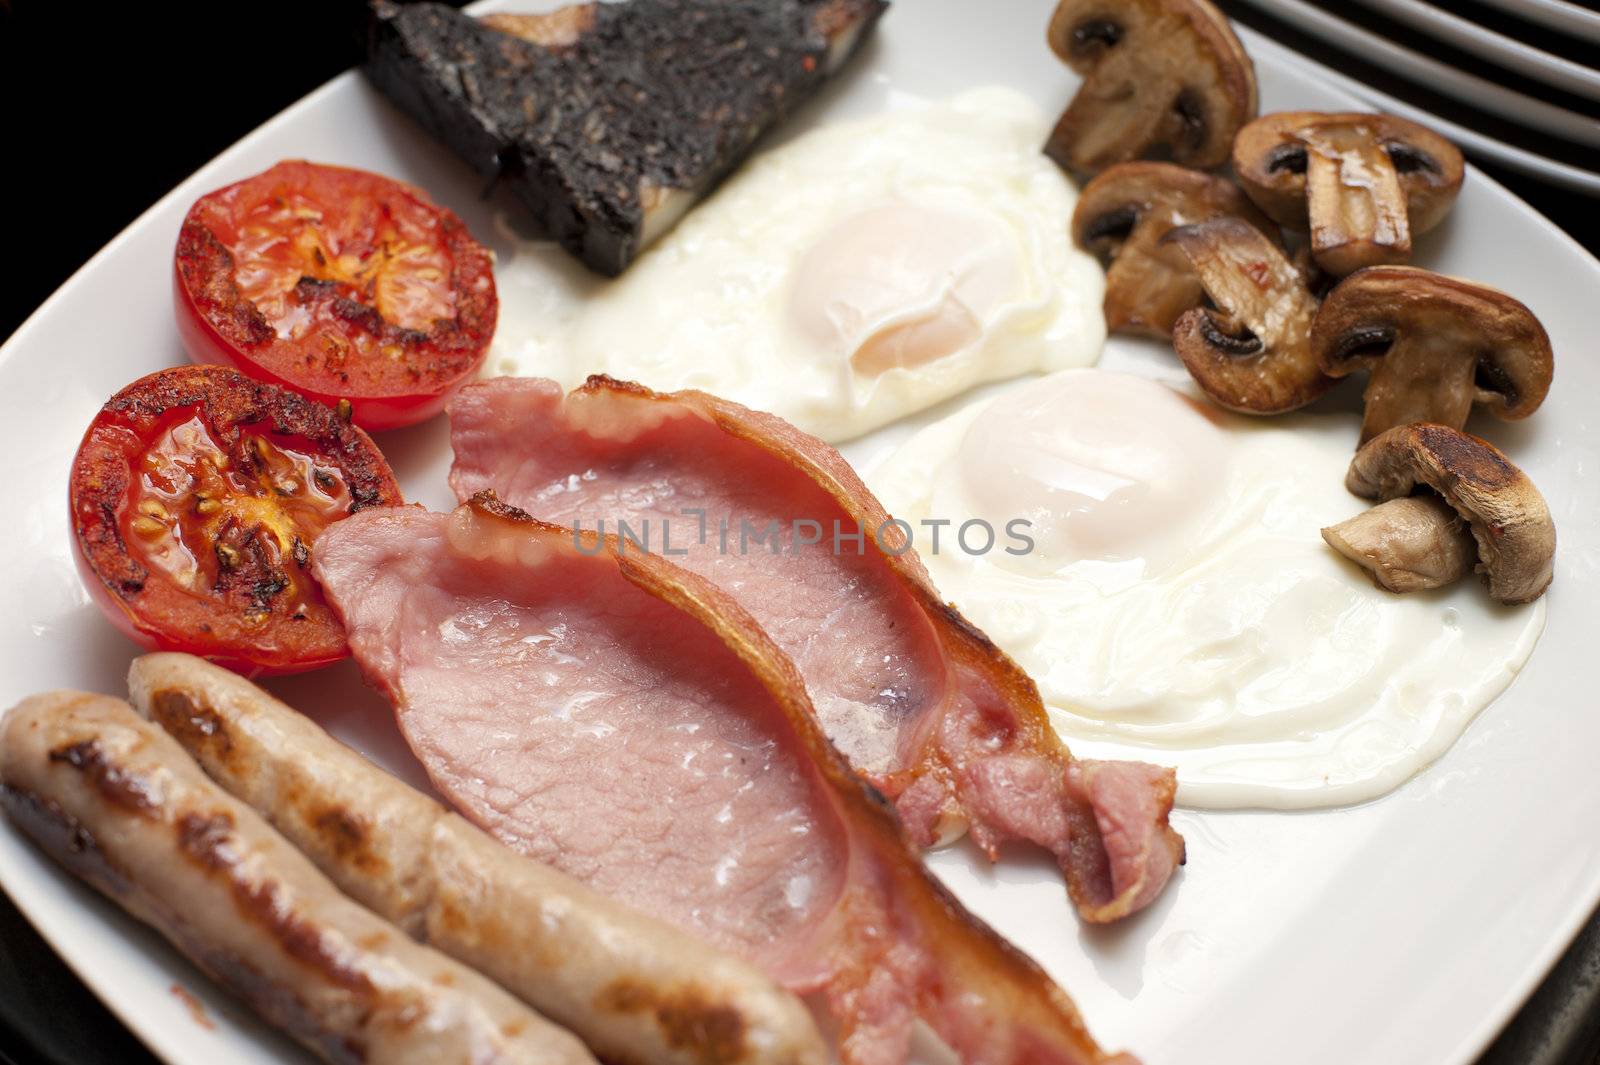 Full cooked English breakfast with a serving of fried eggs, bacon, tomato, sausages, hash brown and mushrooms, close up view on a plate